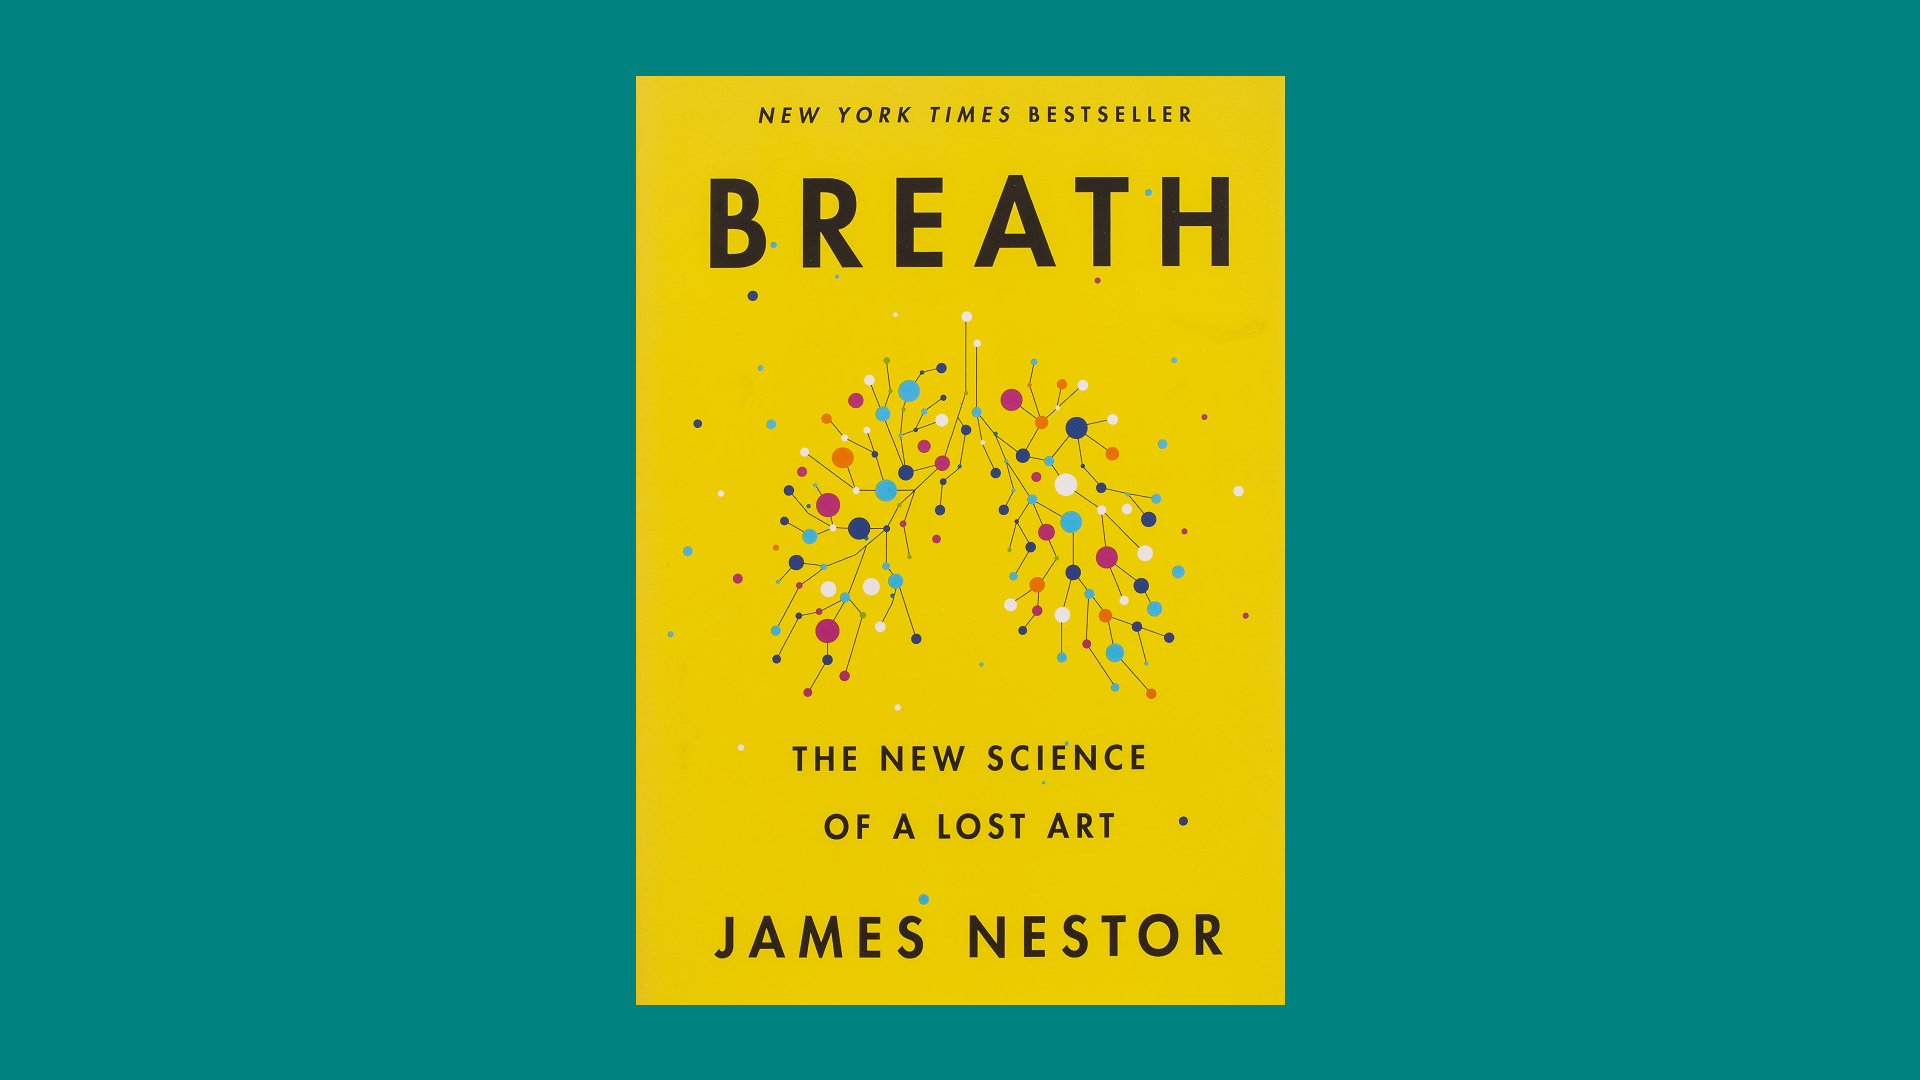 "Breath: The New Science of a Lost Art" by James Nestor